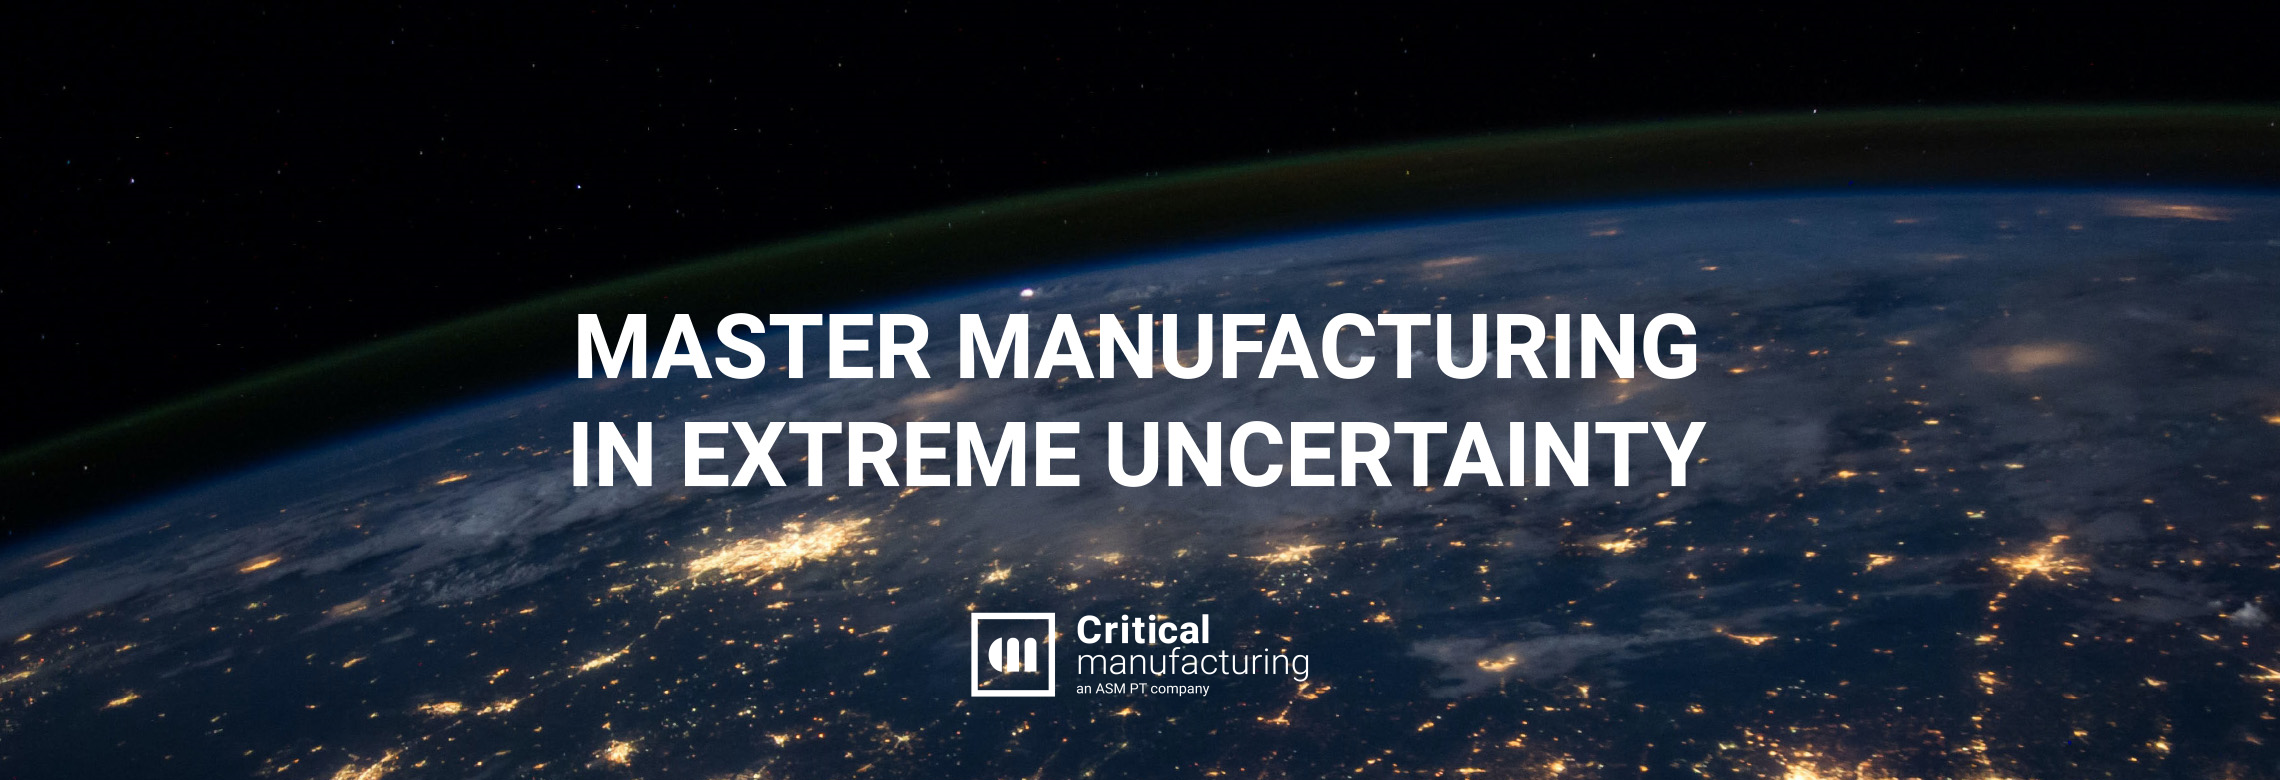 Master manufacturing in extreme uncertainty V9 Banner website